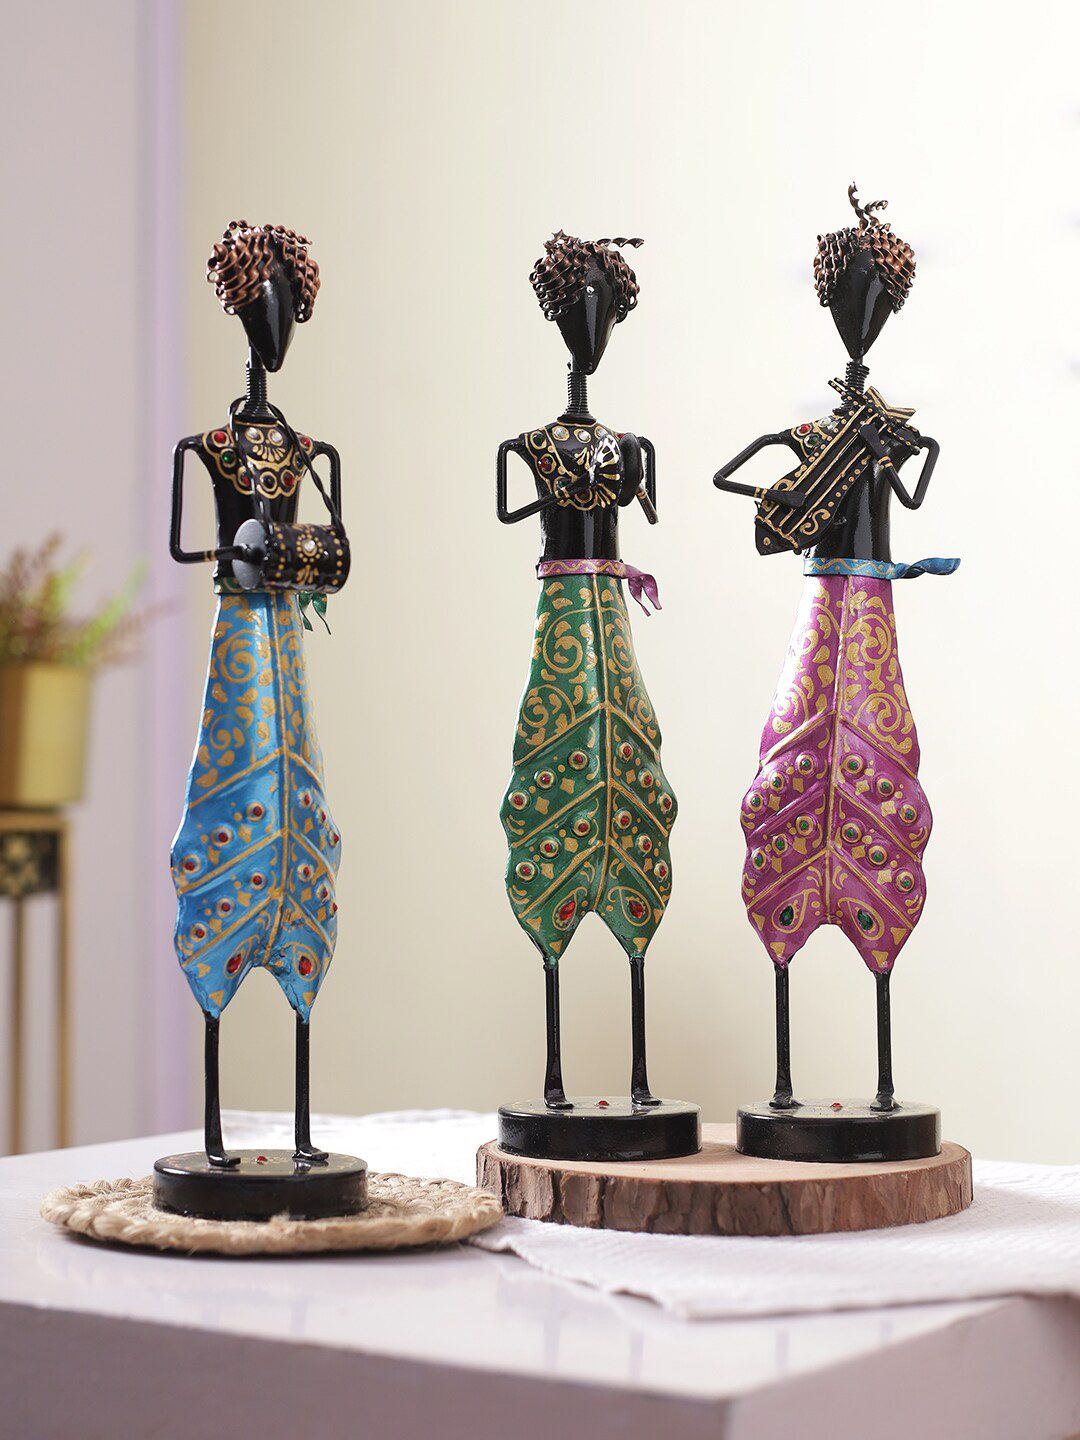 Aapno Rajasthan Set Of 3 Green, Blue & Pink Musical Player Showpieces Price in India